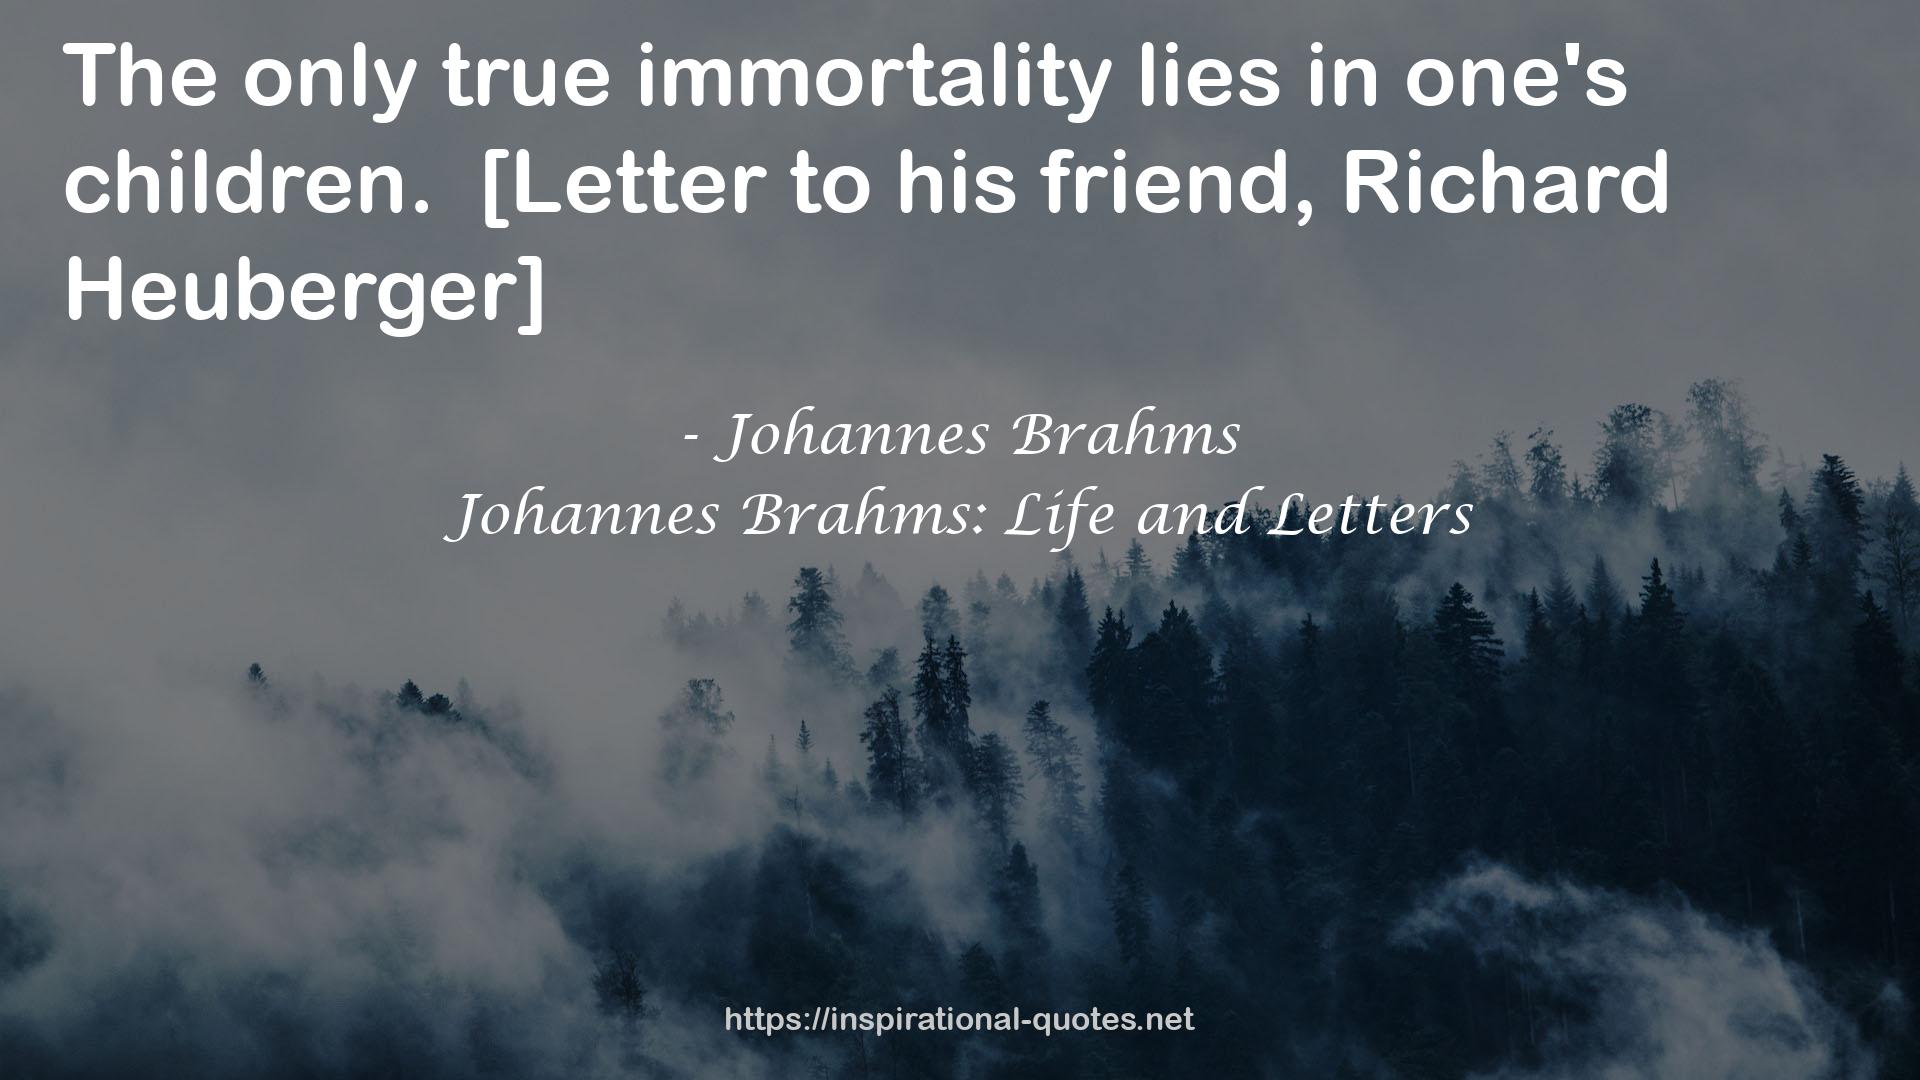 Johannes Brahms: Life and Letters QUOTES